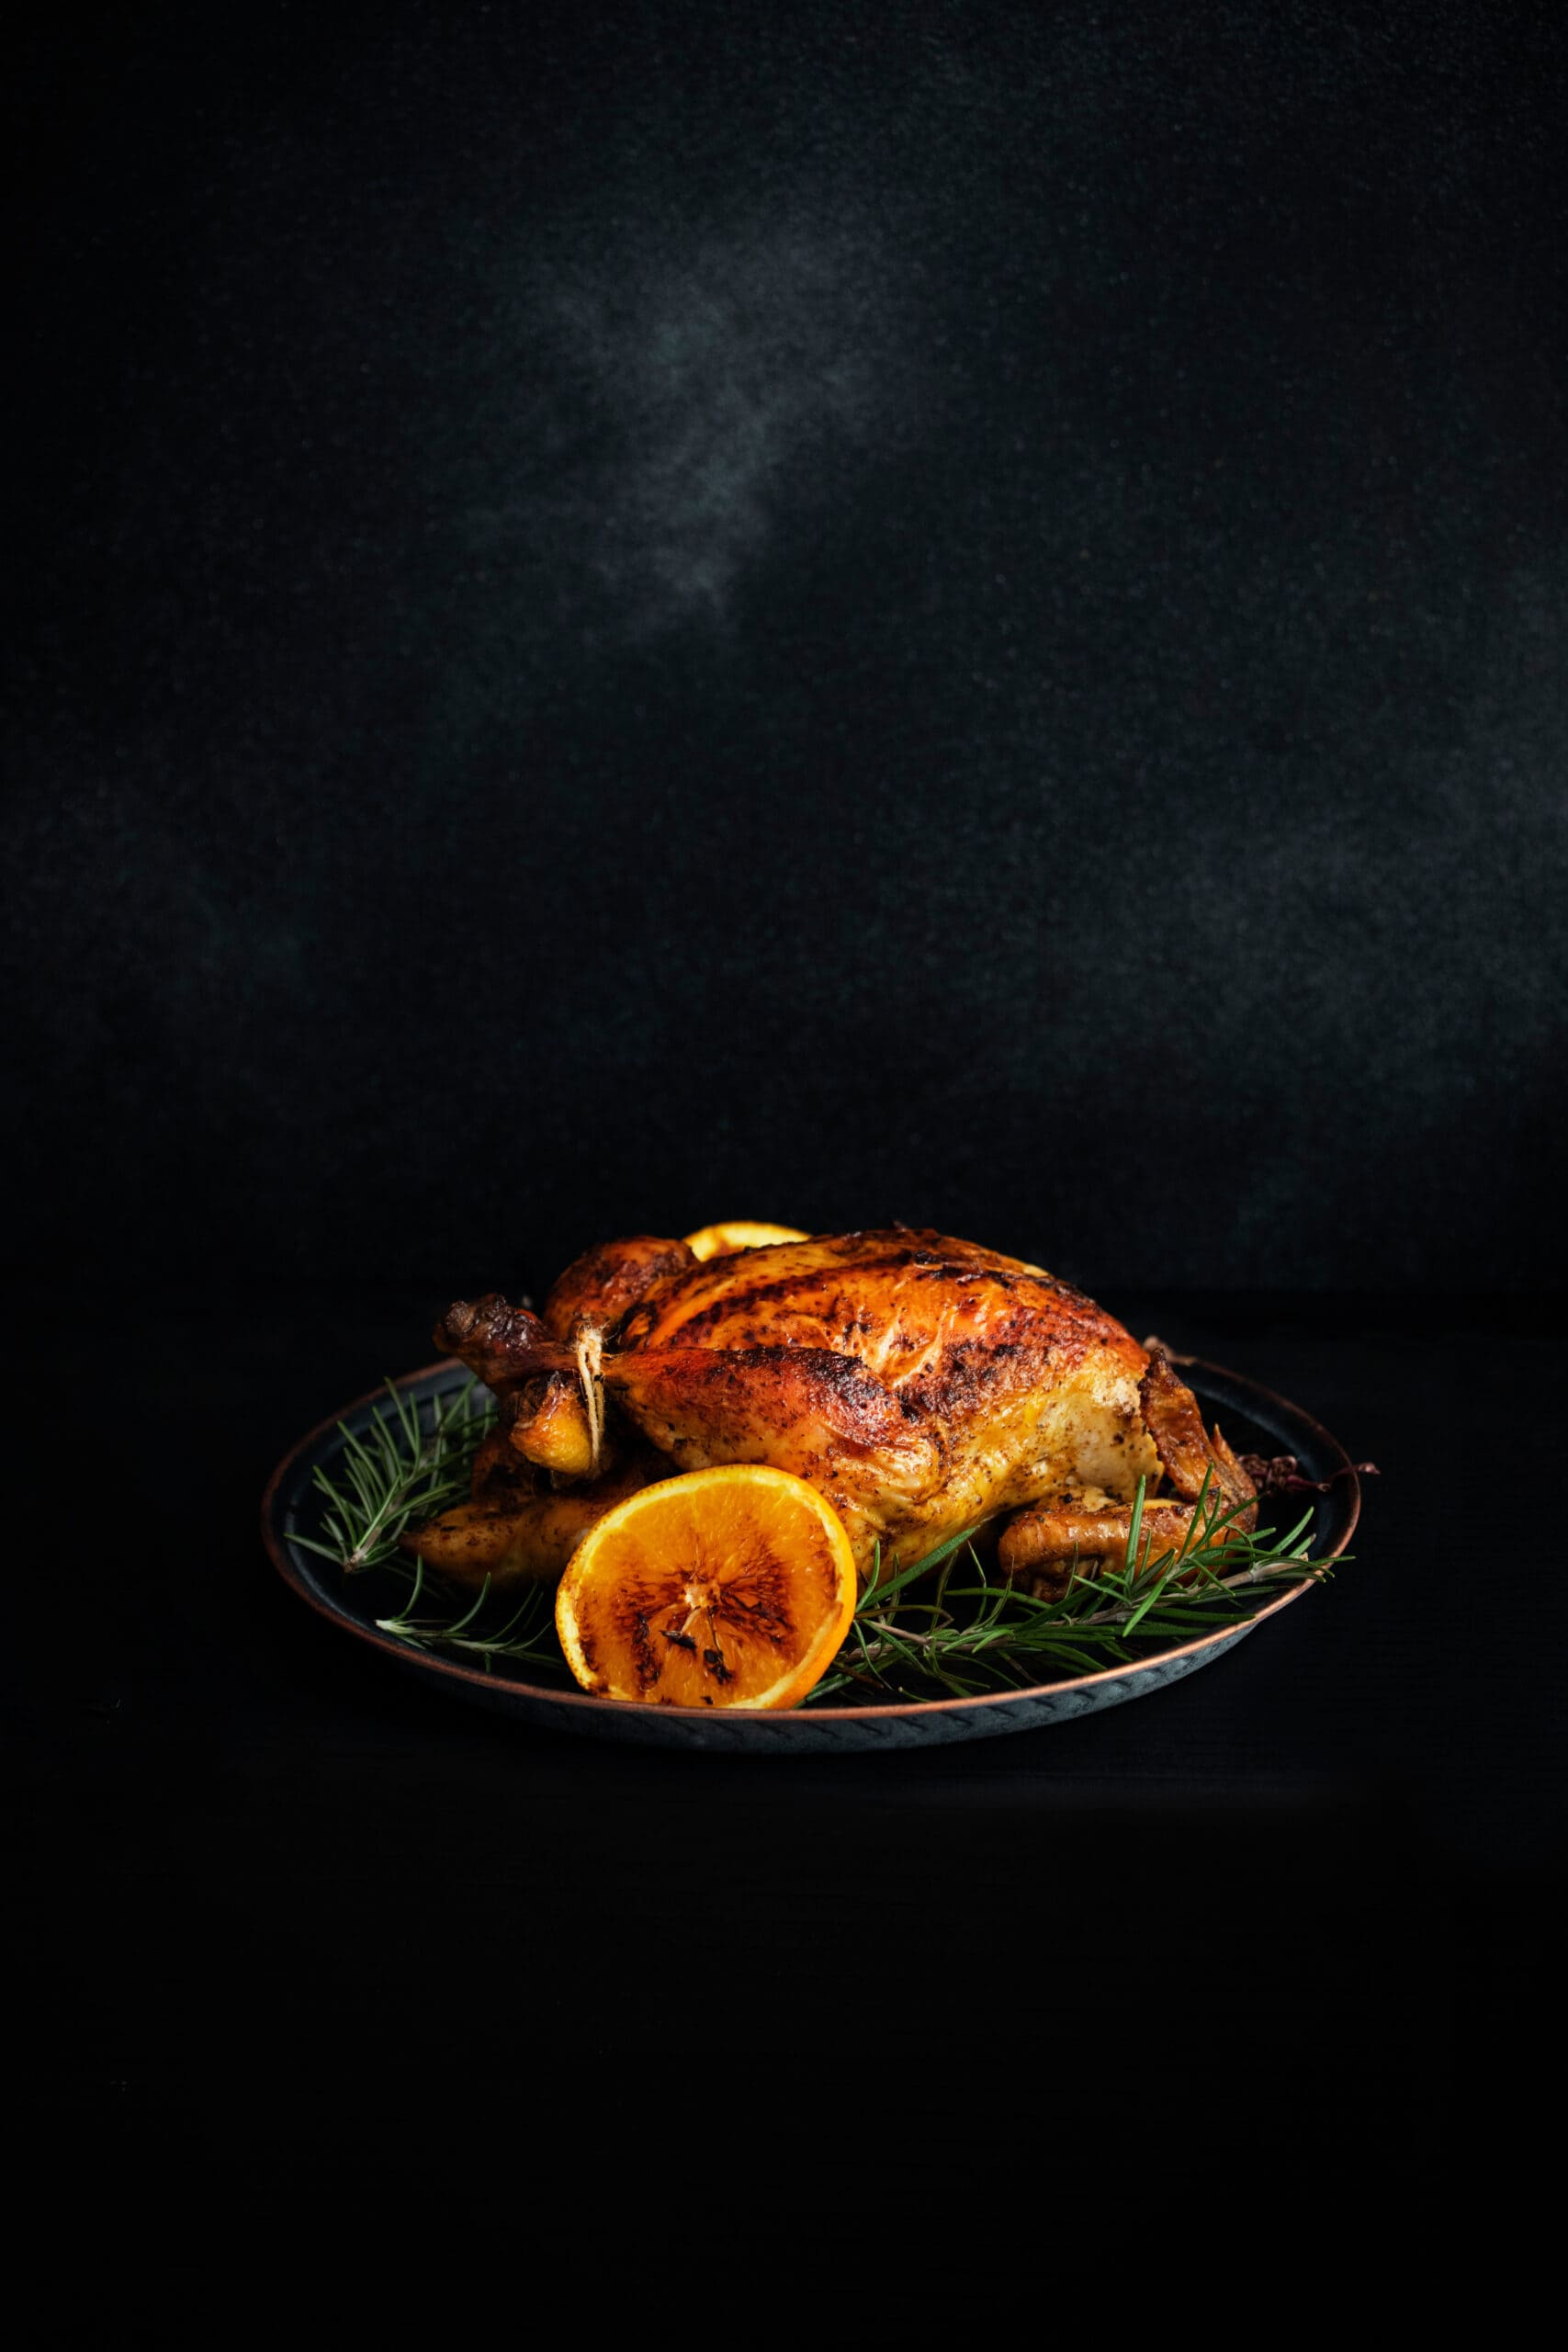 Baked whole chicken with oranges and rosemary. Tray with a festive Christmas dish on a black table and black background. Low key. Vertical. Copyspace